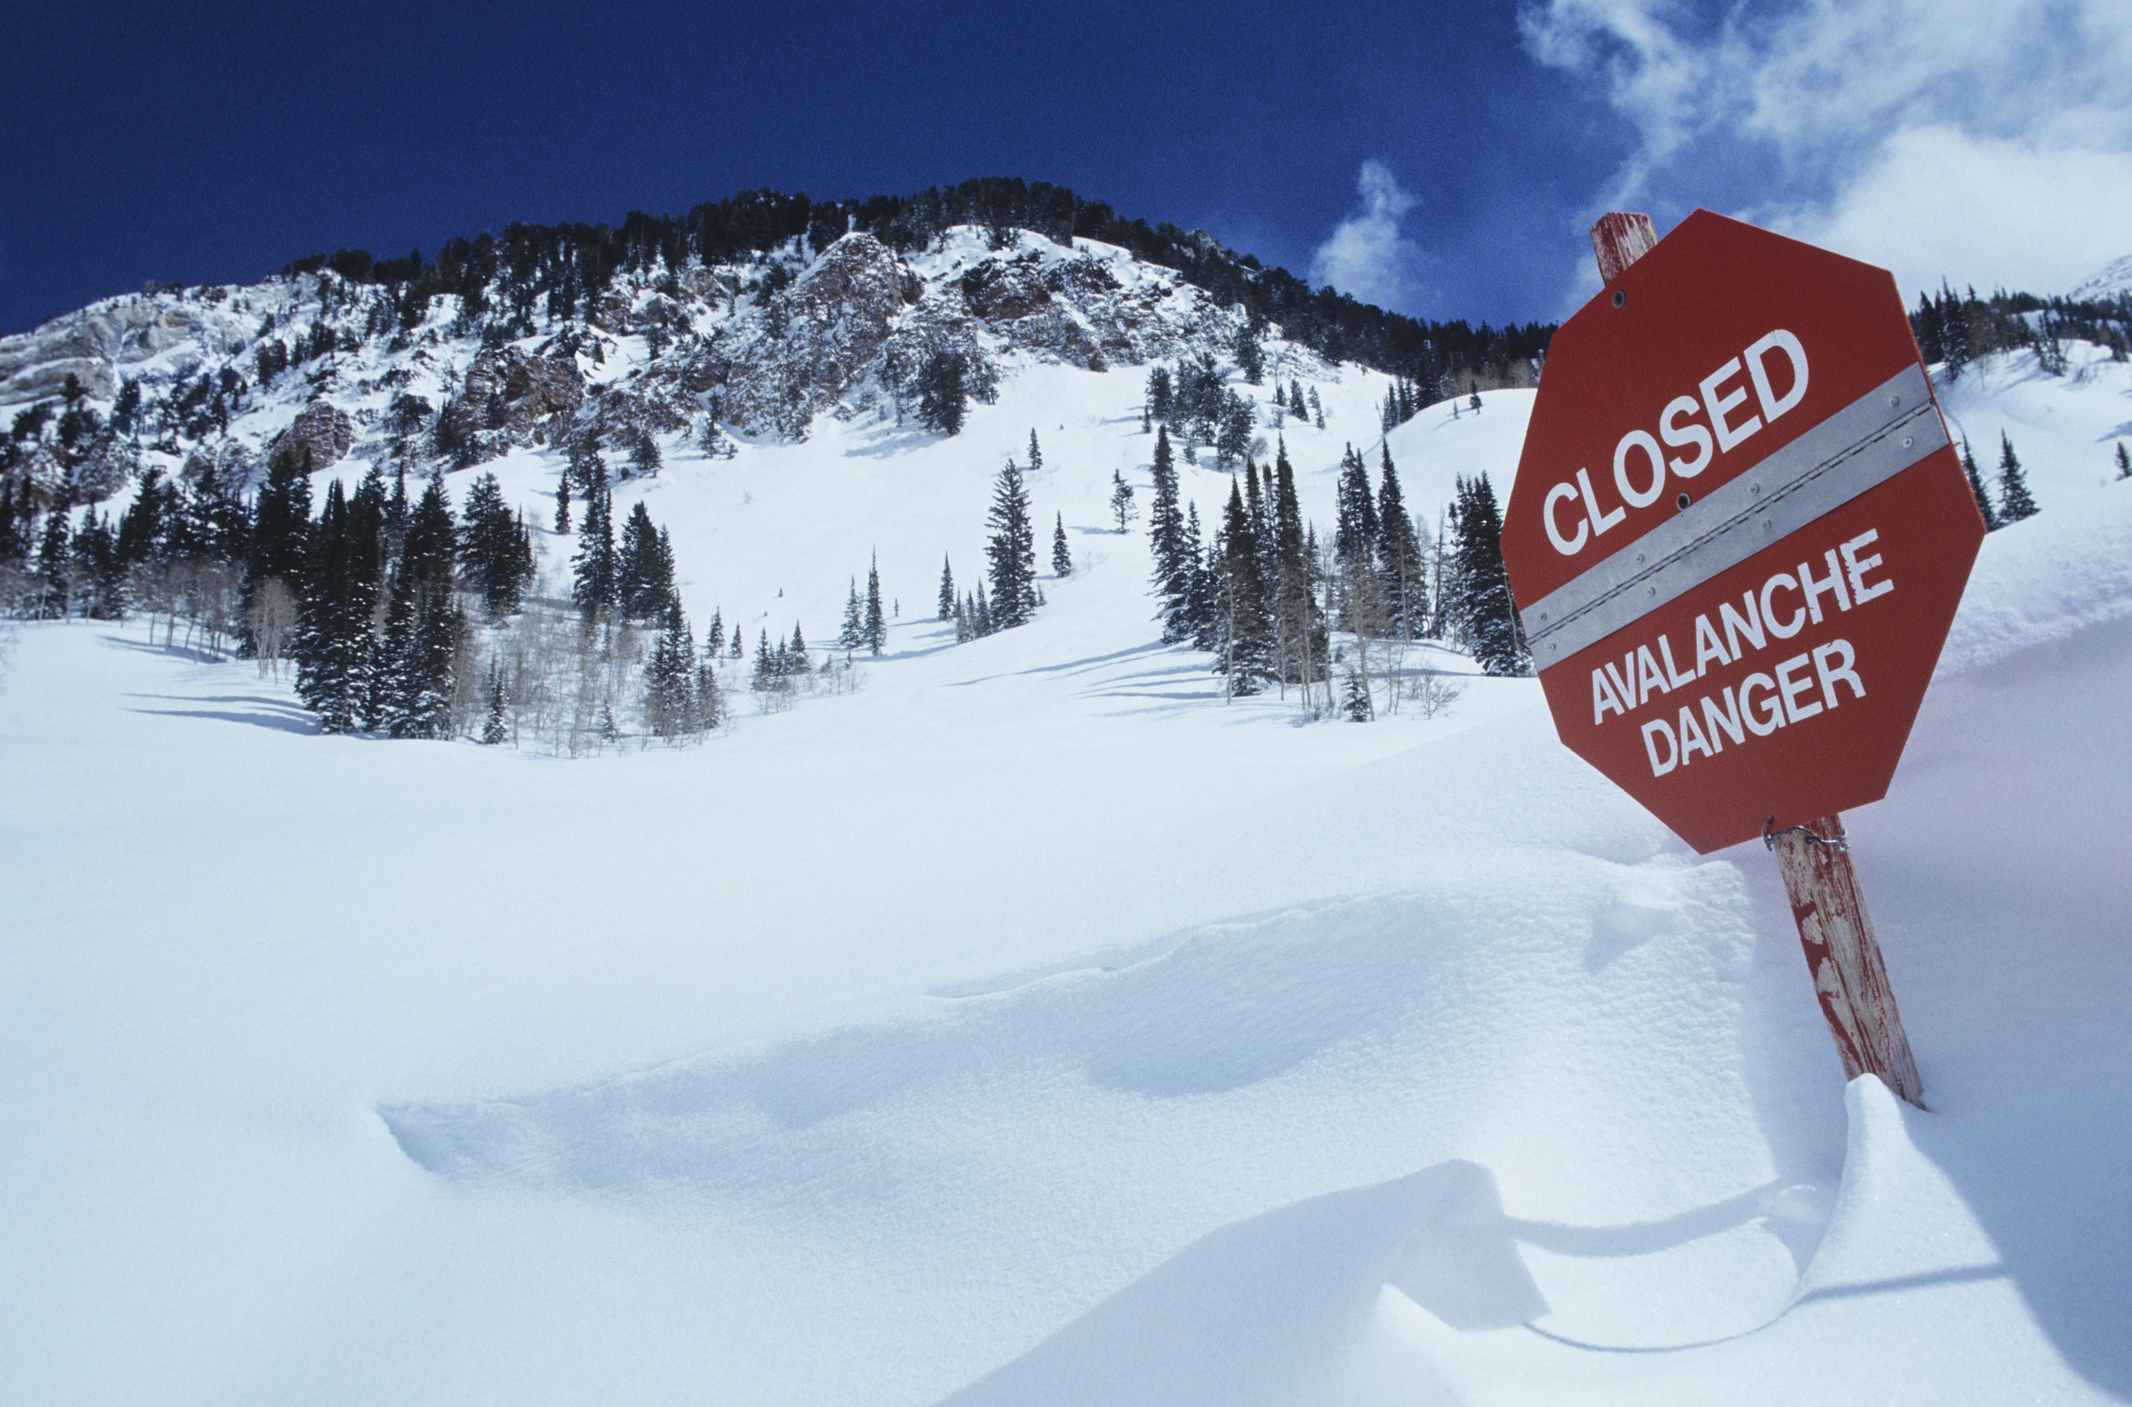 Closed Avalanche Danger Sign on Slope